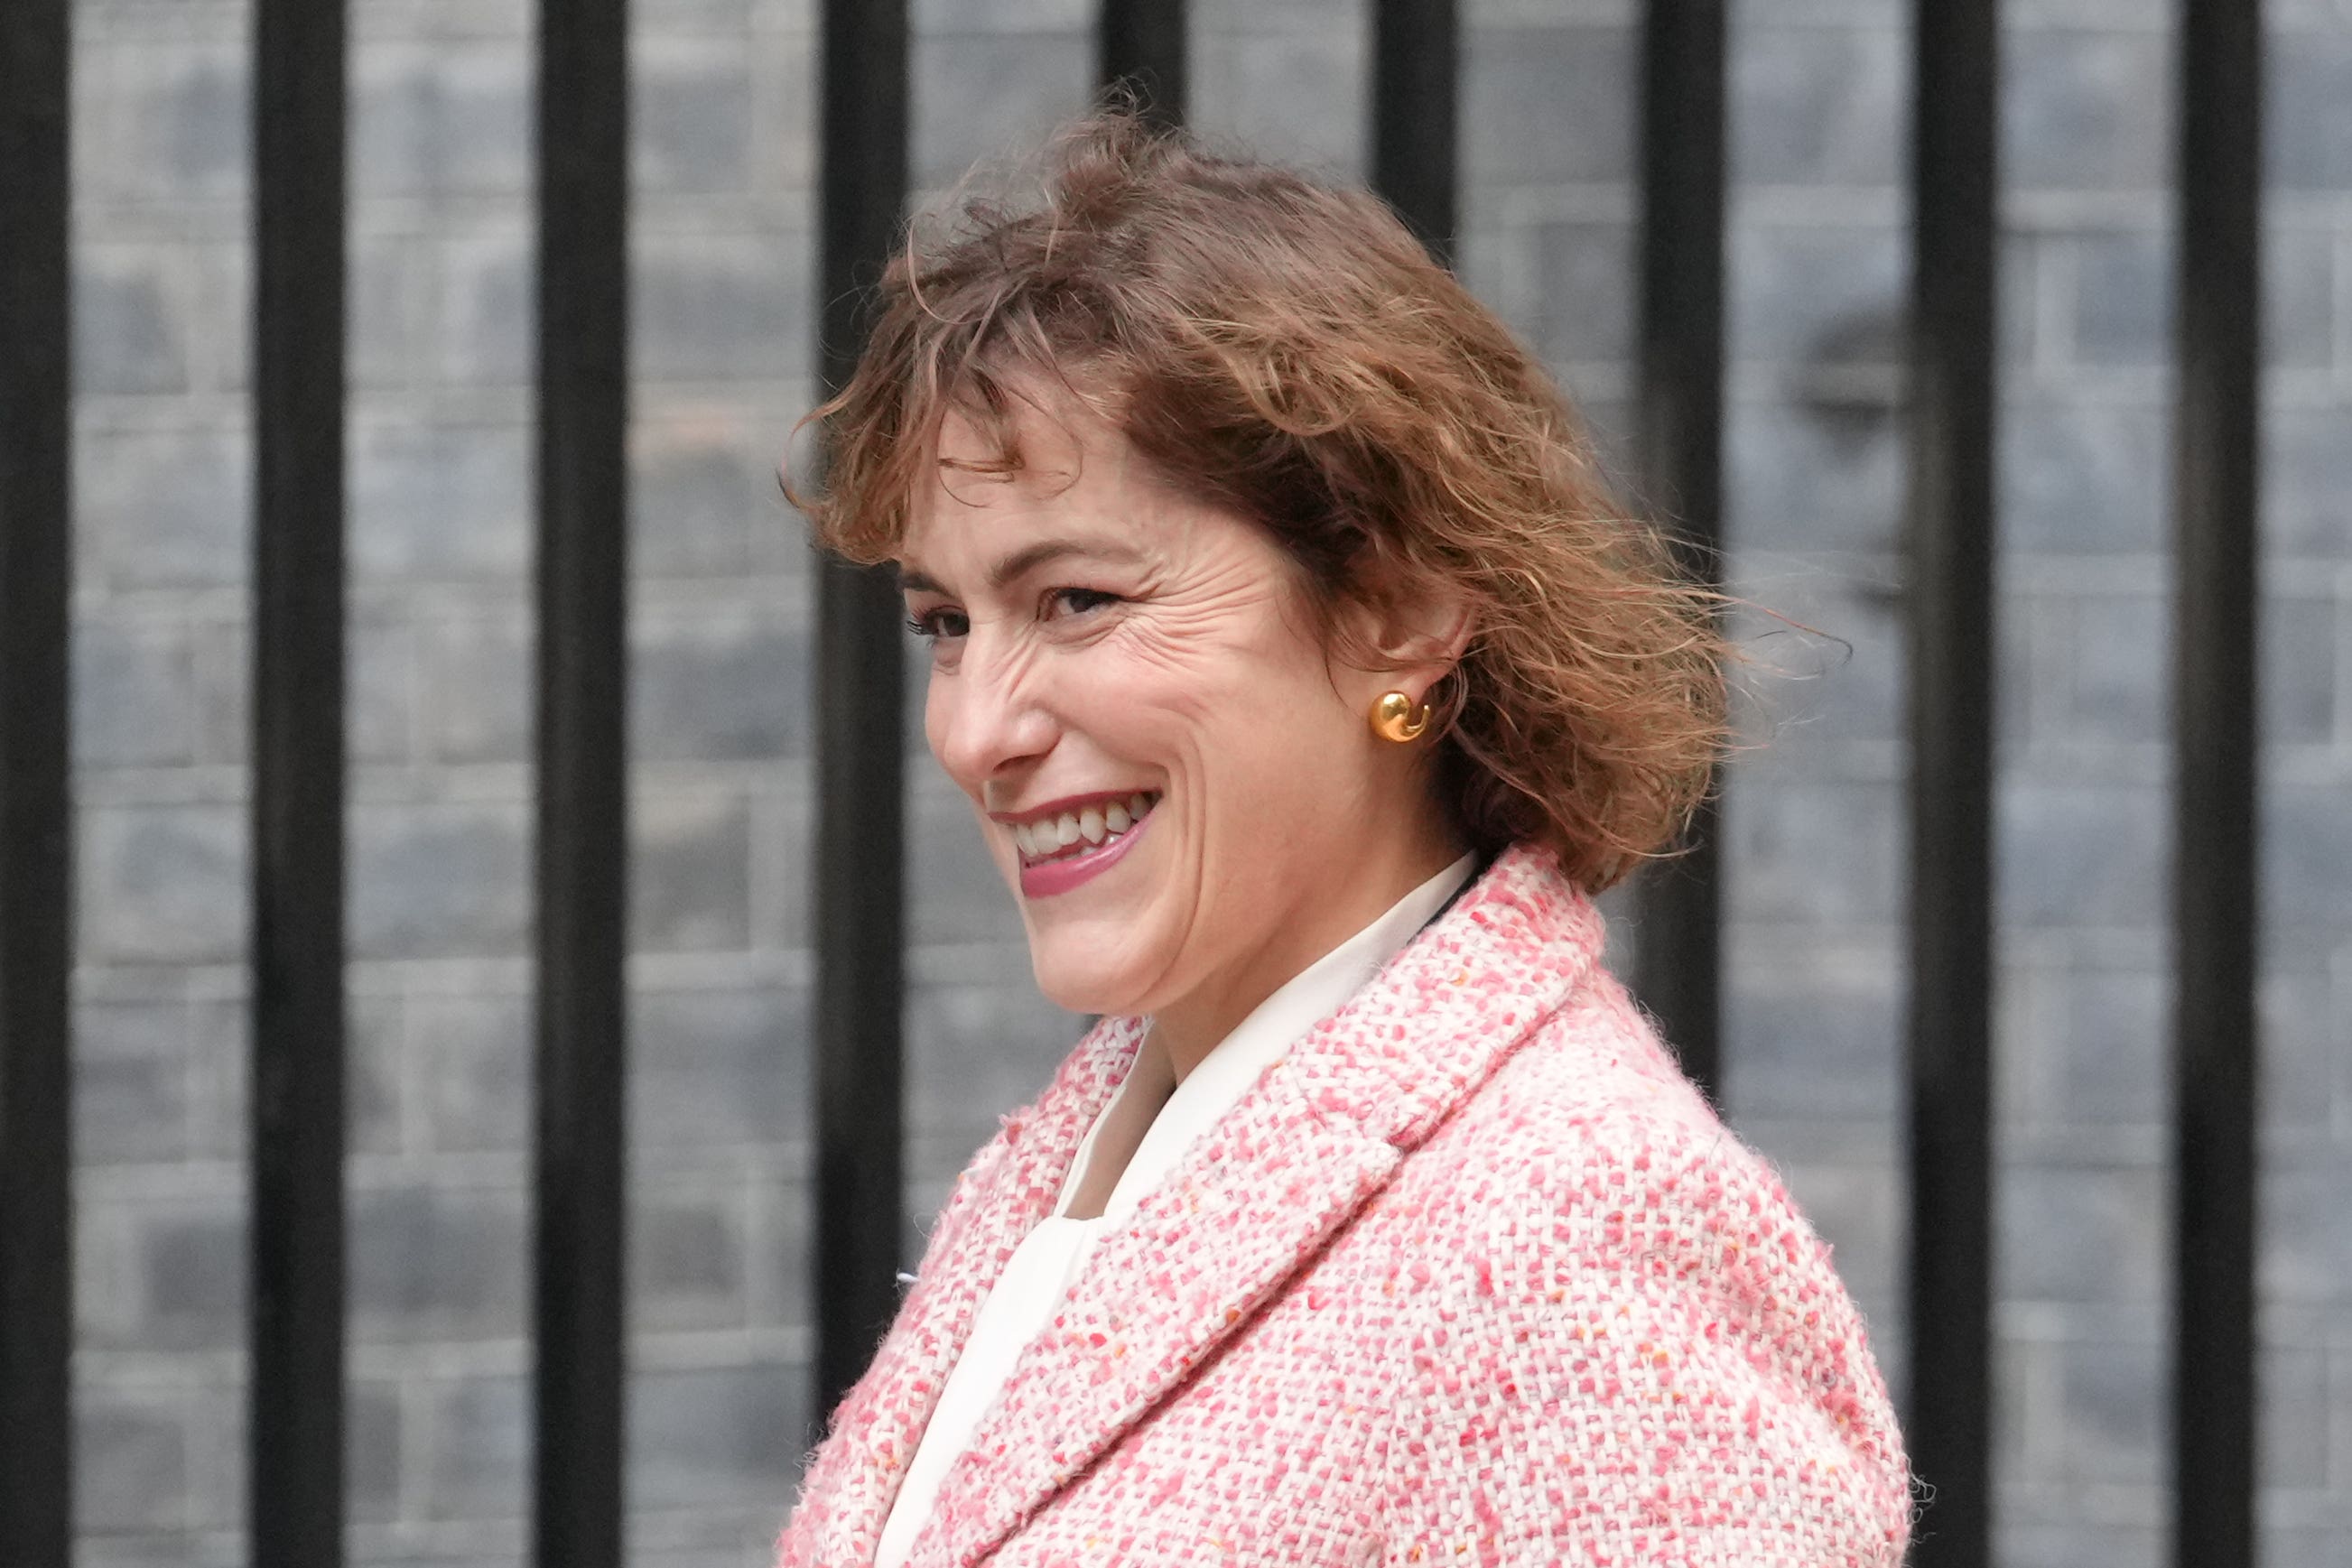 Victoria Atkins, new secretary of state for health and social care